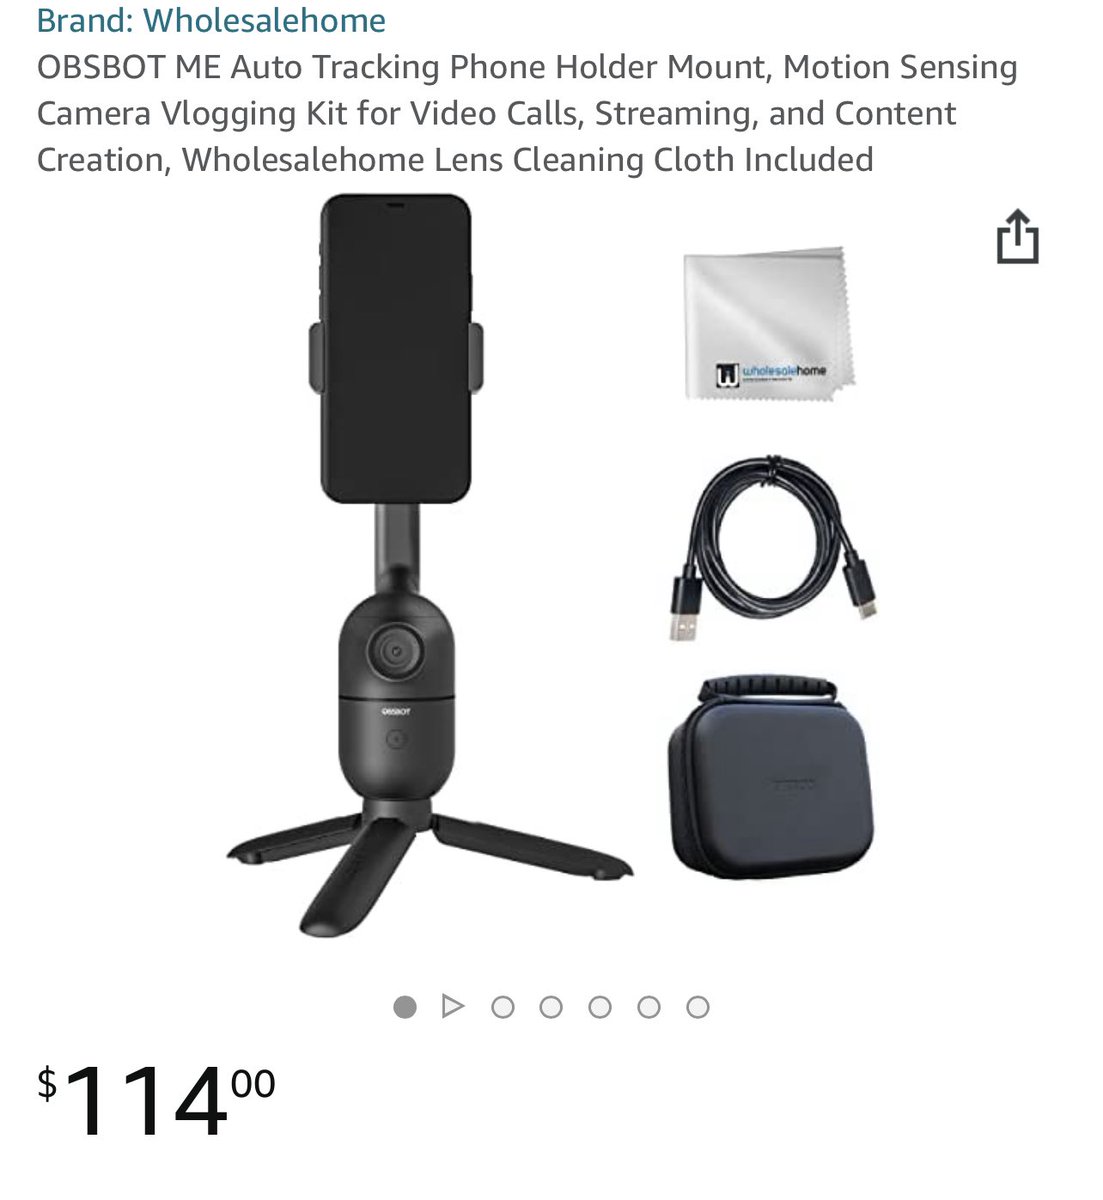 Anybody have one of these or similar? I’m thinking it would be nice to have a camera autotrack and follow me as I move but how do I record sound? Is that done separately or do you use a wireless lapel mic plugged in?